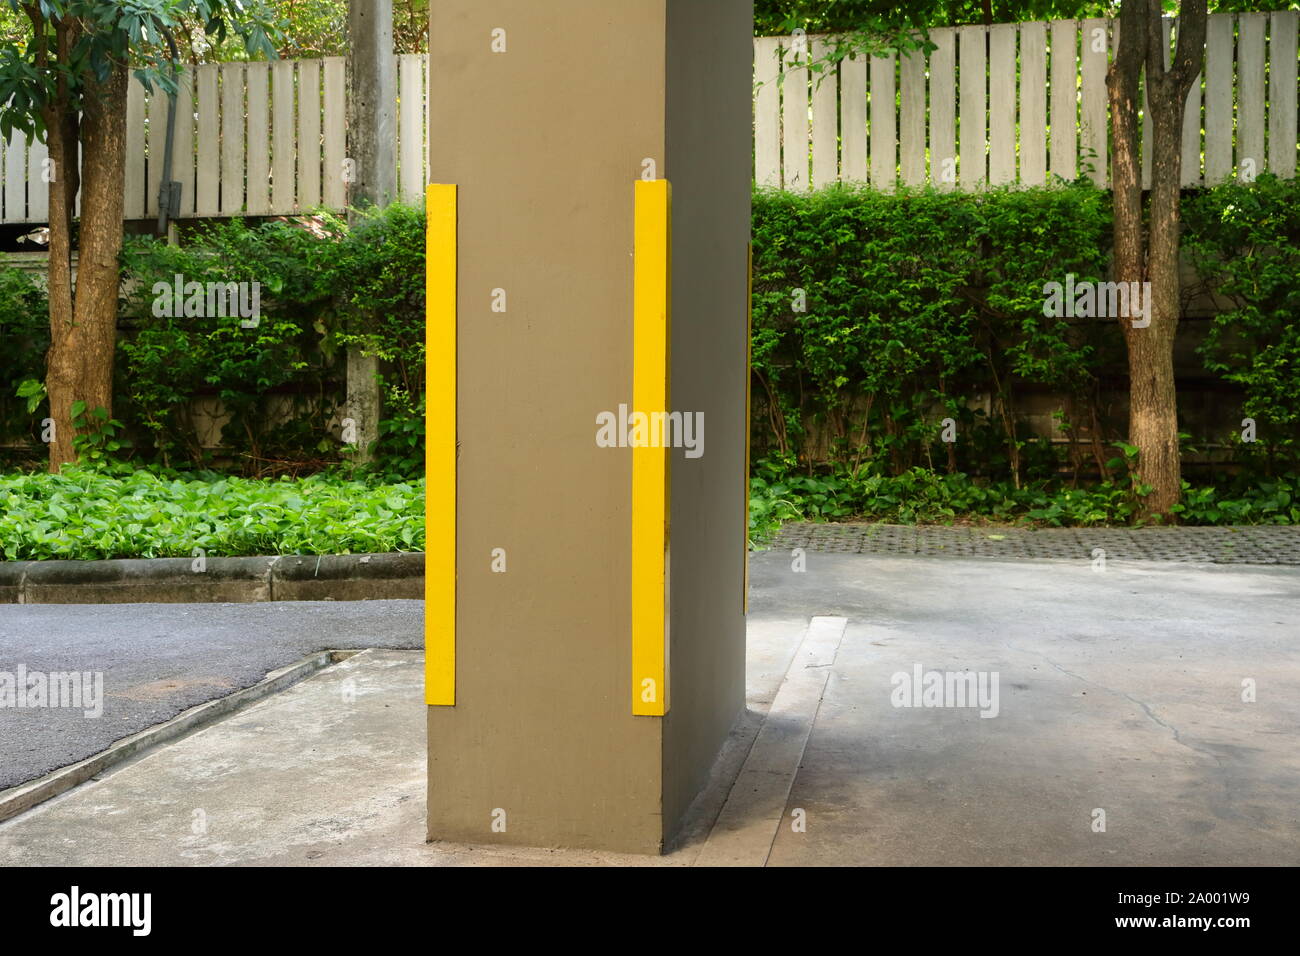 Corner guard or column protector made from stainless steels attached to  concrete column in parking lot. This can reduce damages cause by car impact  Stock Photo - Alamy